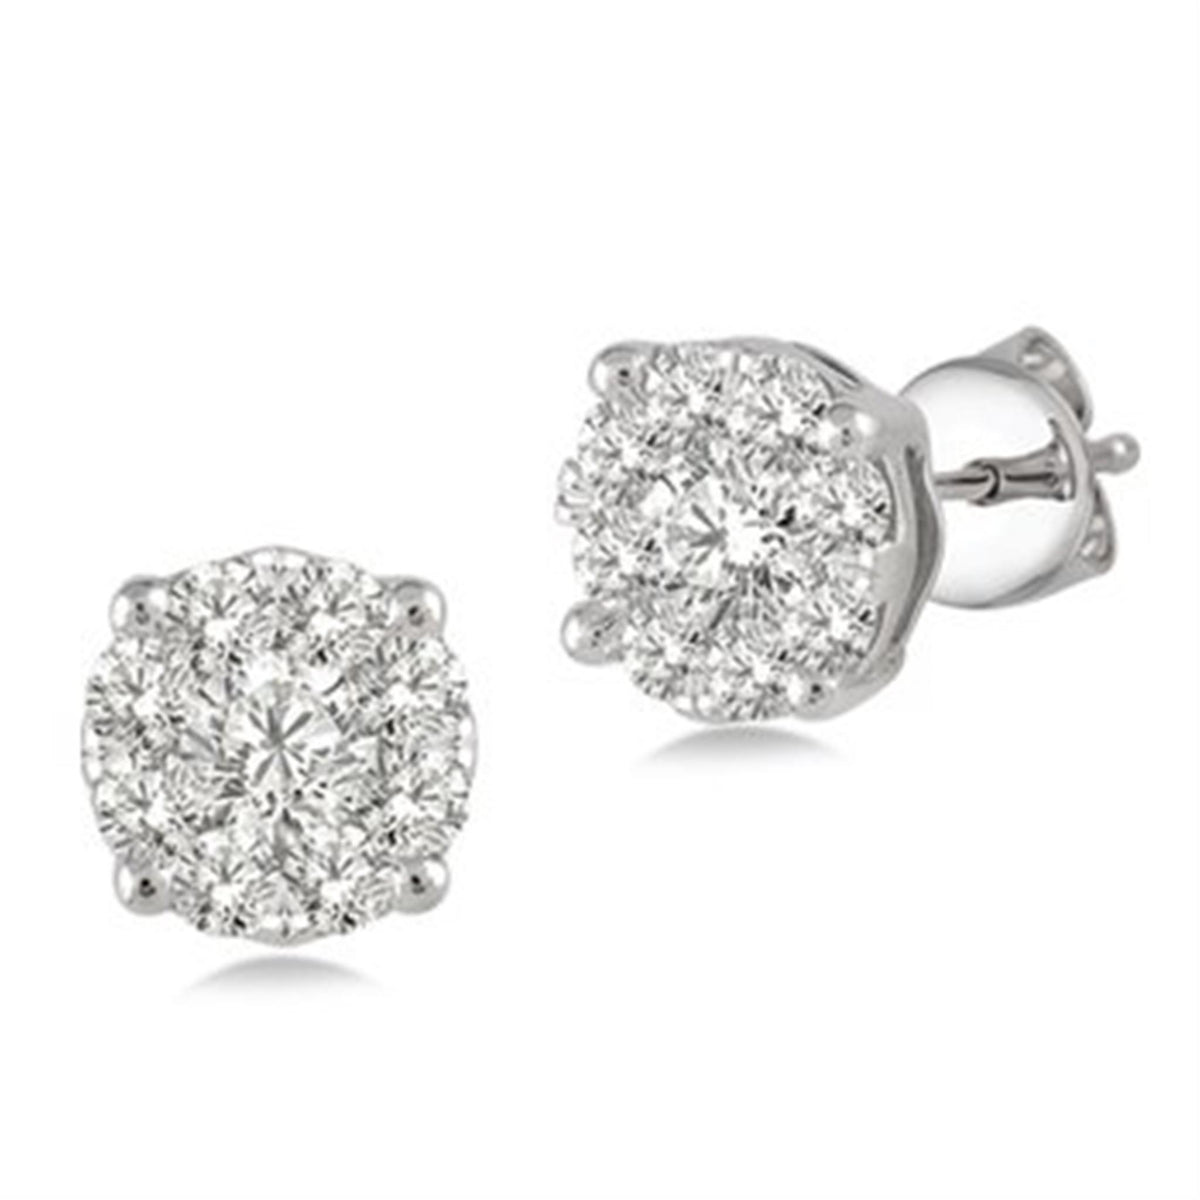 Lovebright 14Kt White Gold Stud Earrings With .50cttw Natural Diamonds